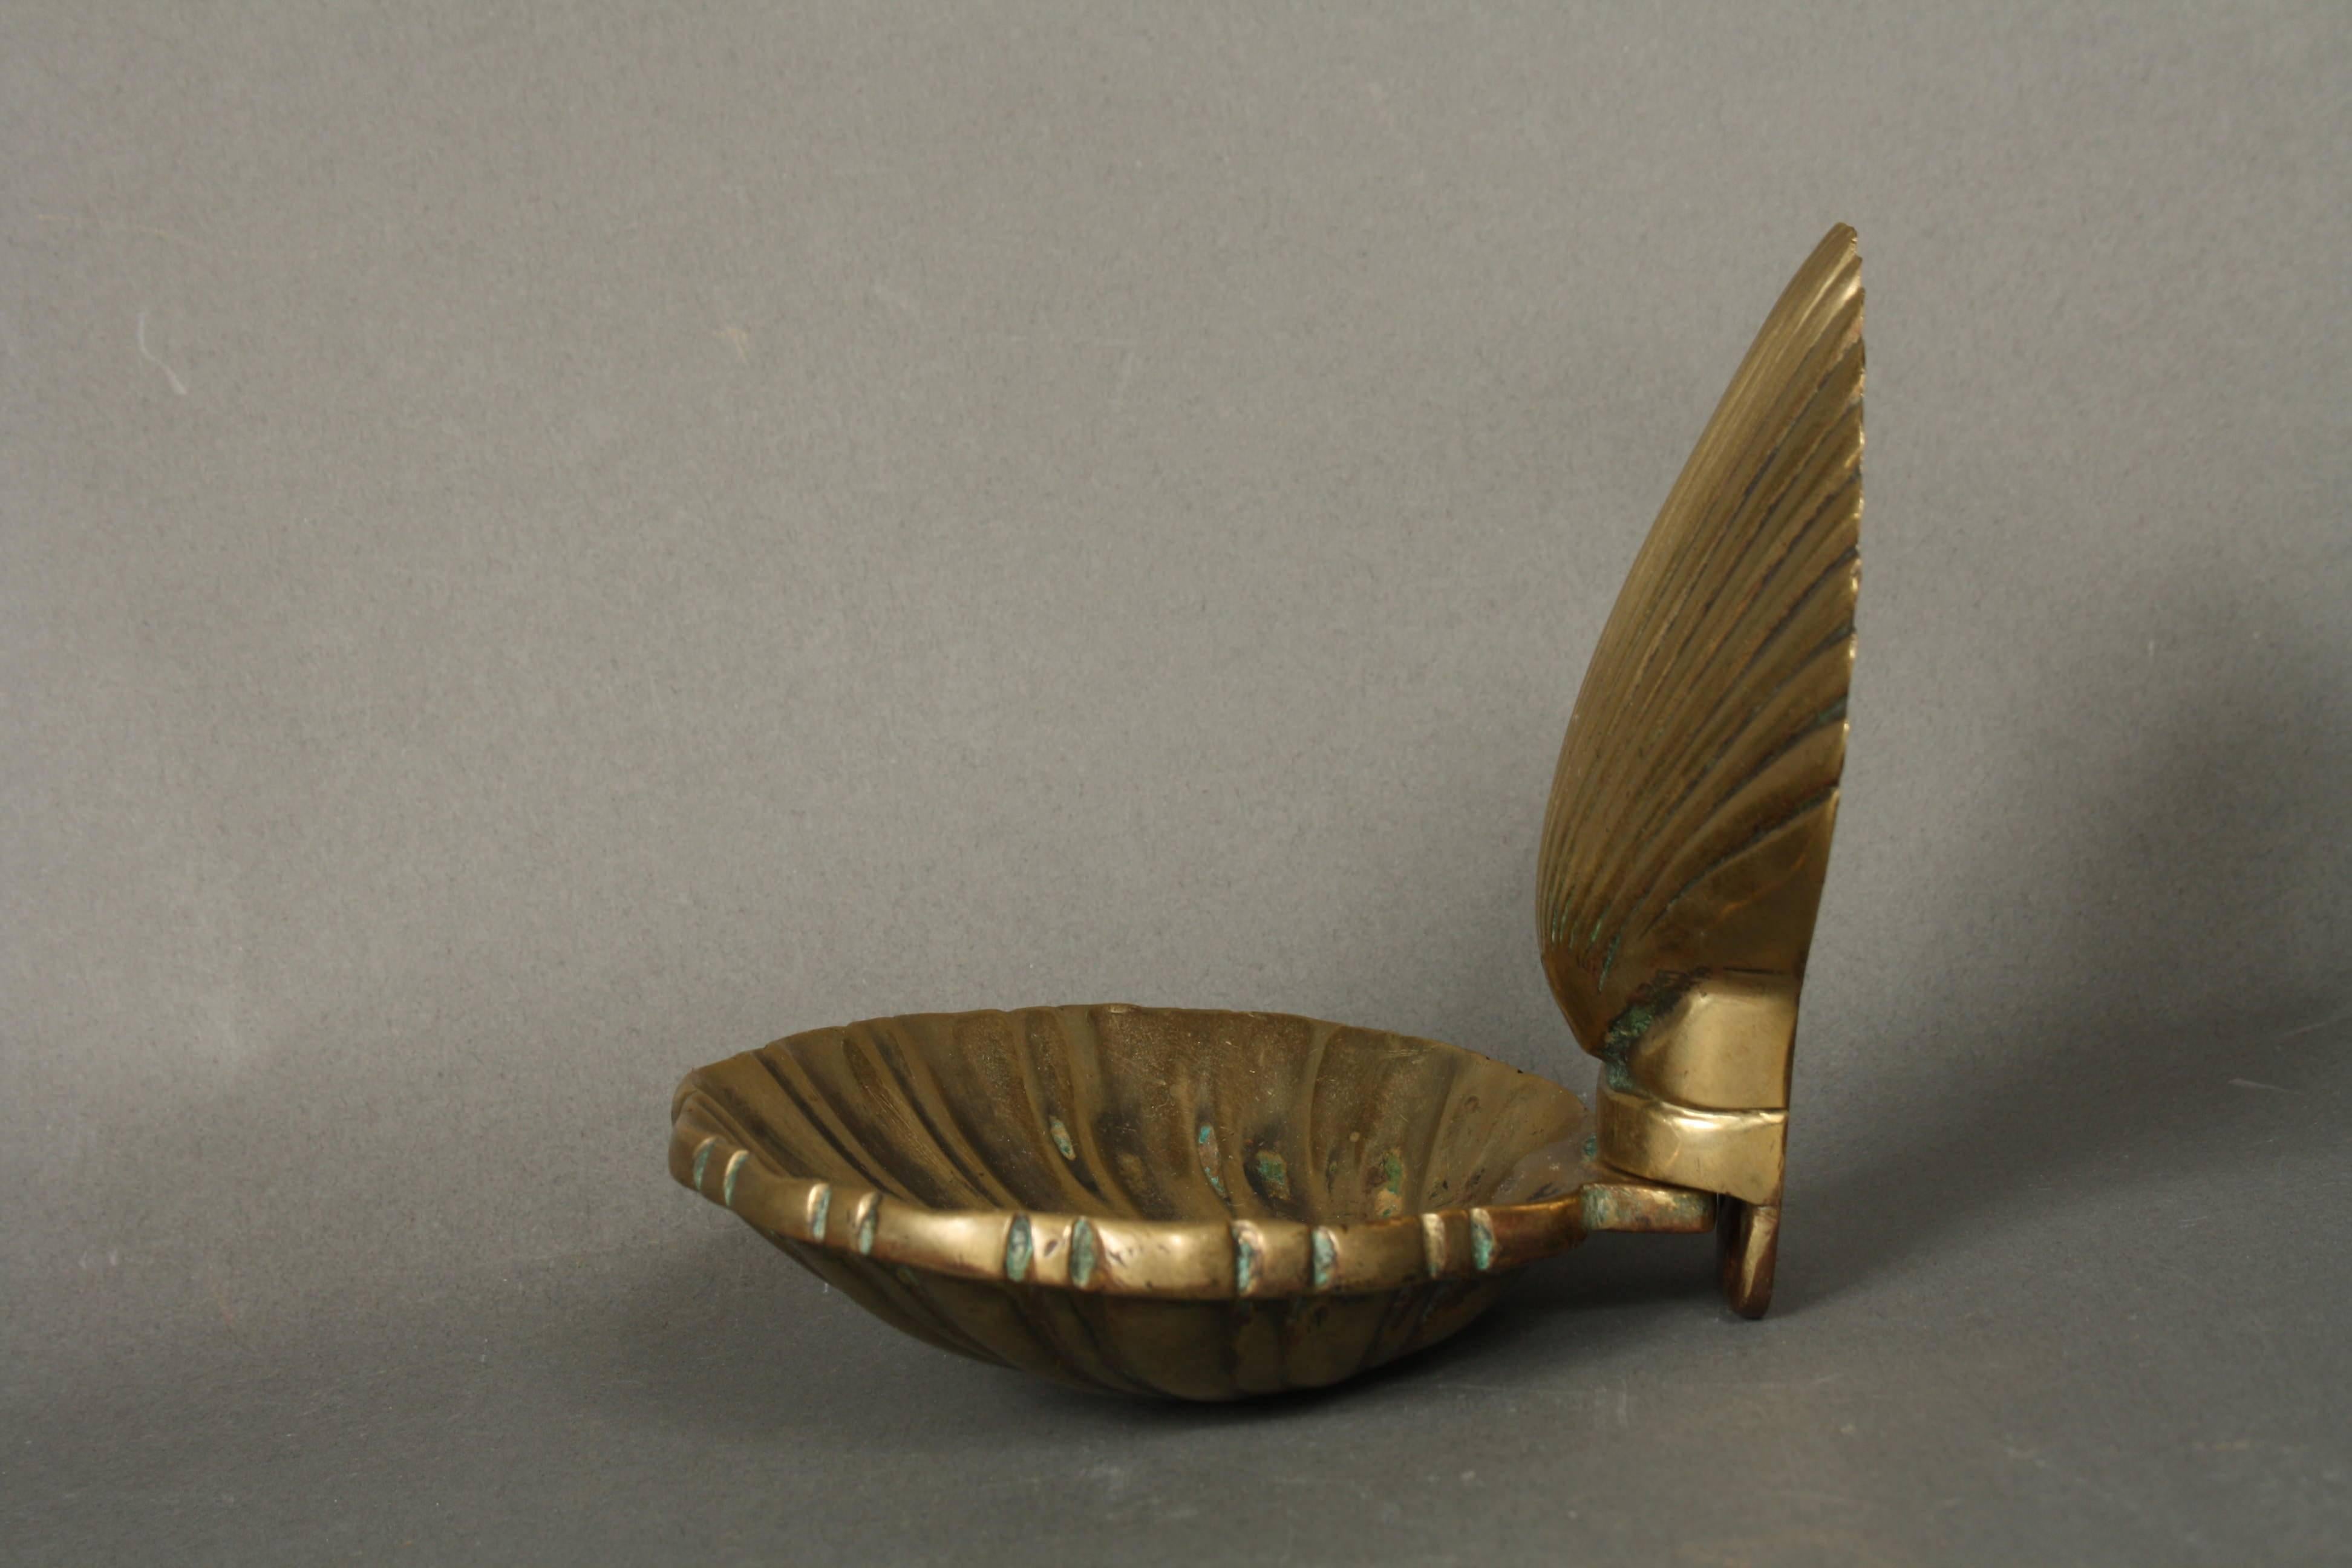 Shell soap dish and toothbrush holder, brass, 1950s. Beautiful set for the bathroom. Can be mounted at the wall.